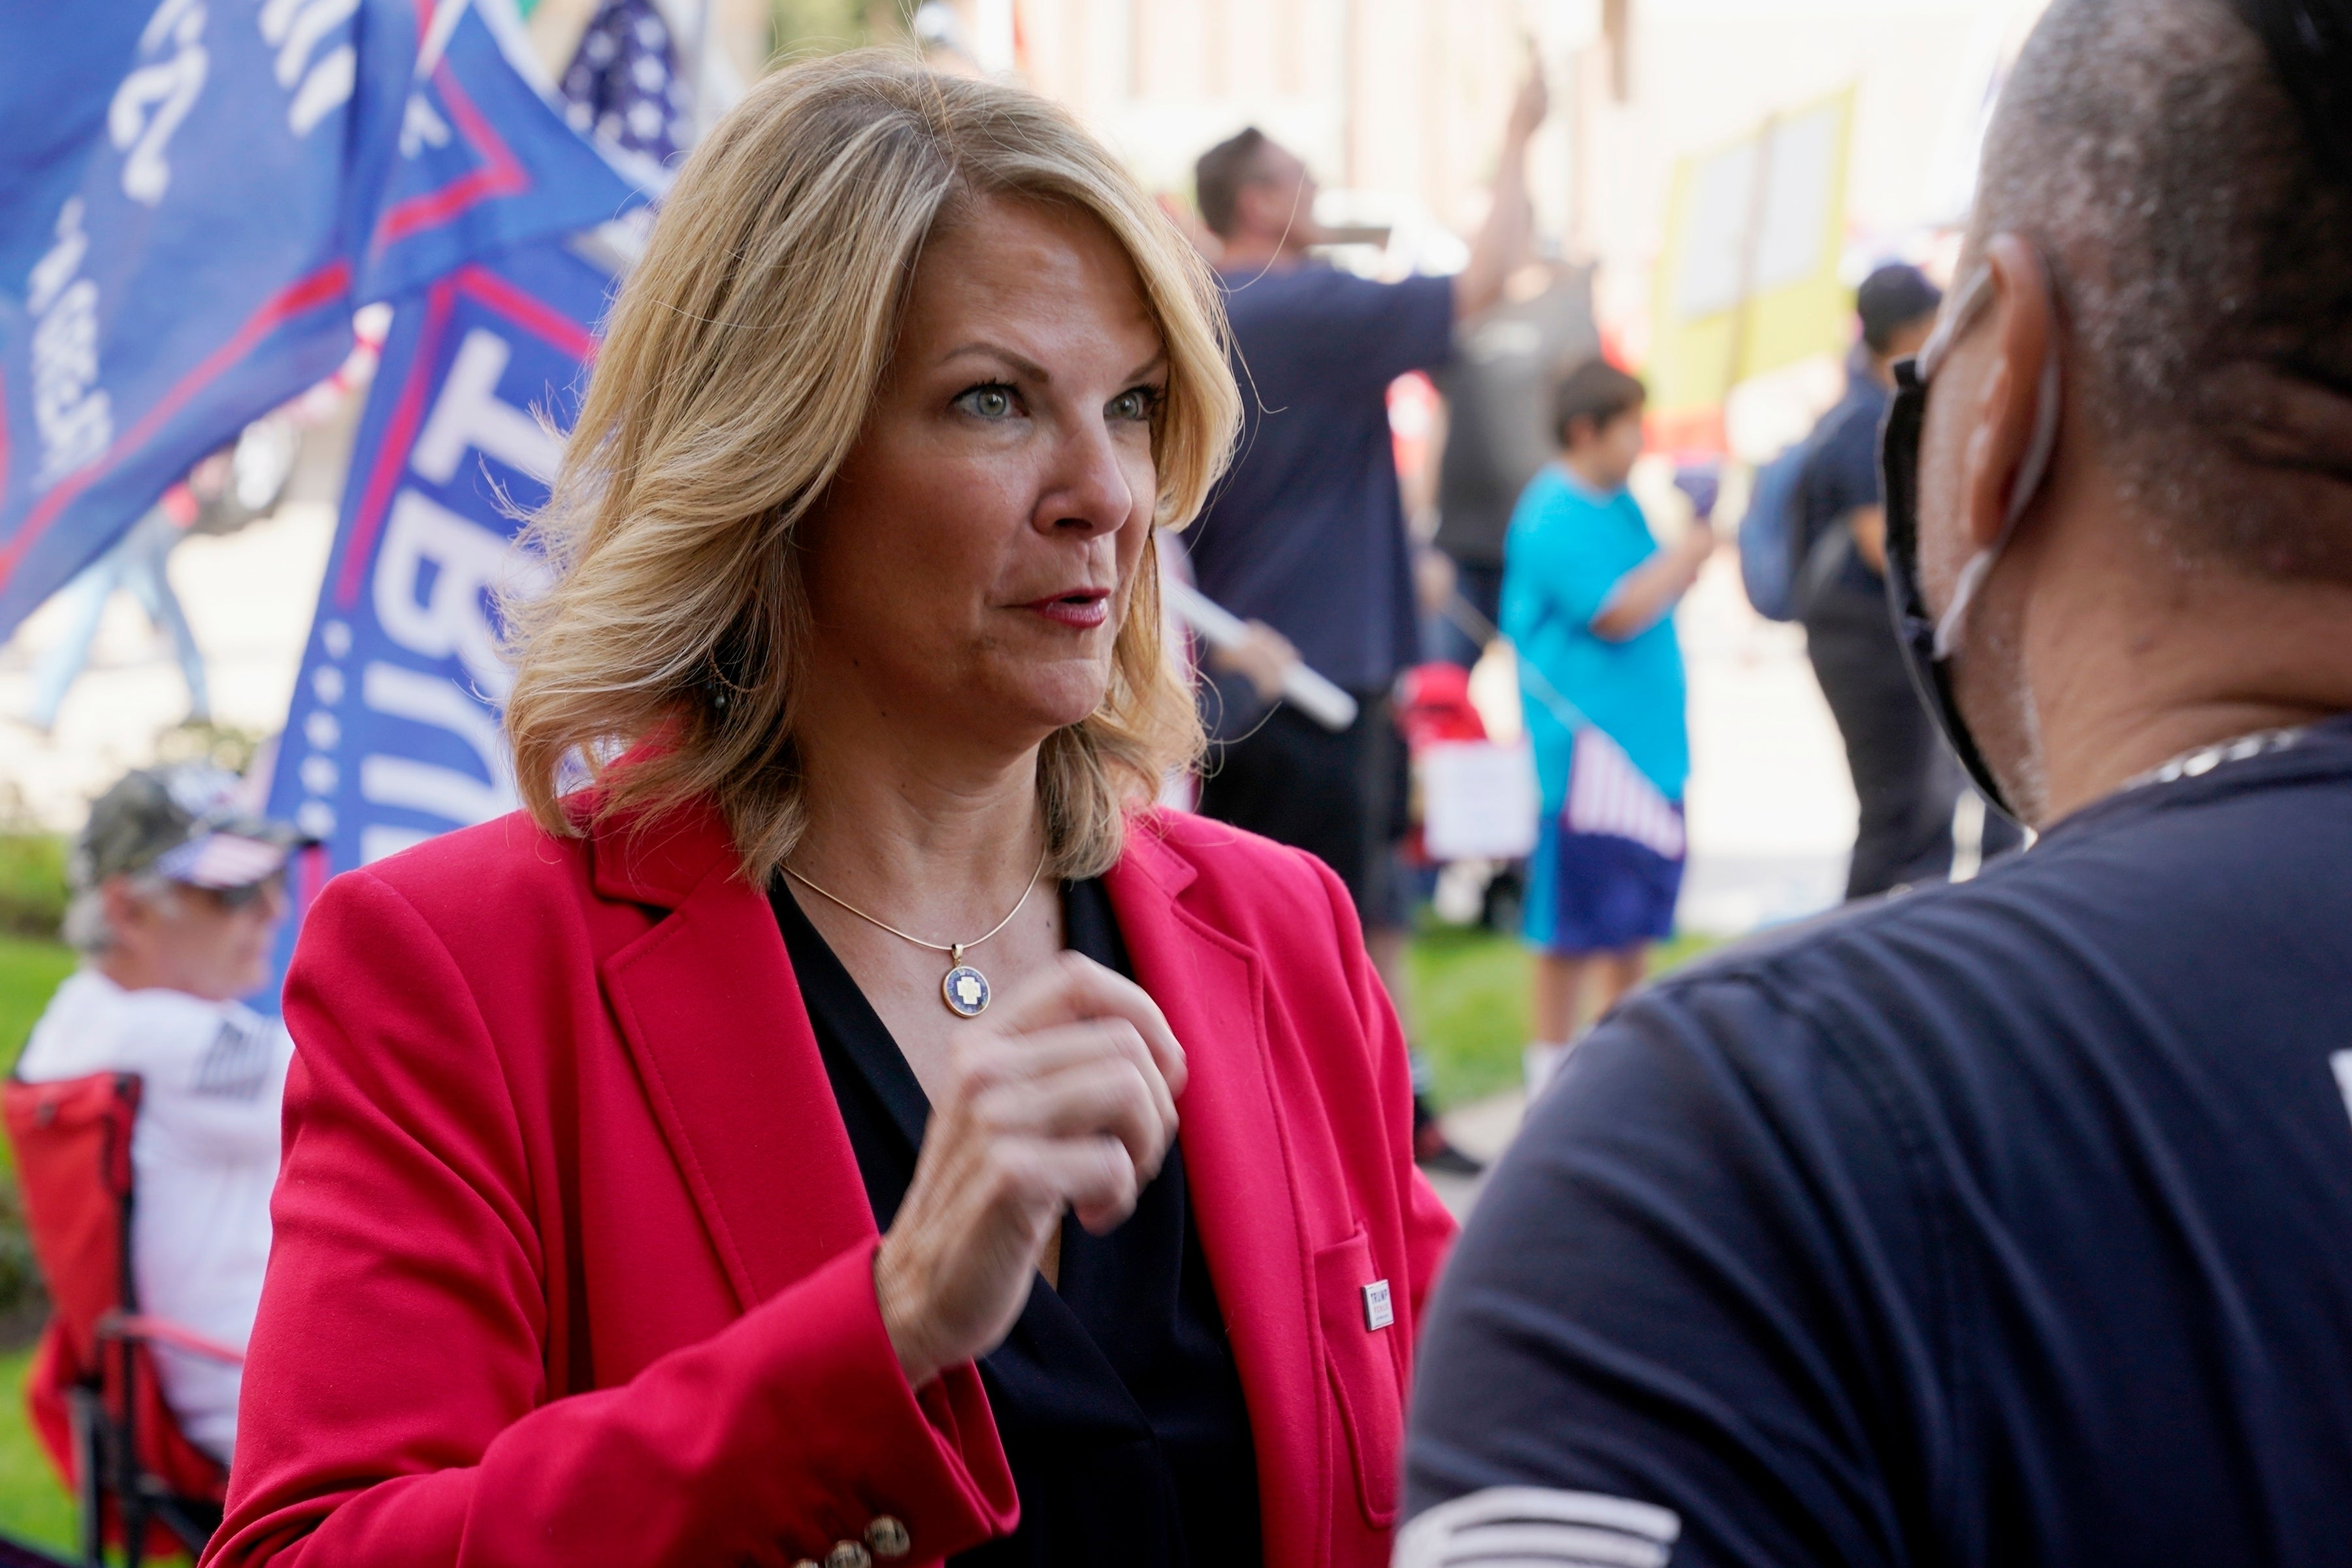 Dr. Kelli Ward, left, chair of the Arizona Republican Party, talks with a supporter of President Donald Trump as they join the crowd at a rally outside the Arizona Capitol, Nov. 7, 2020